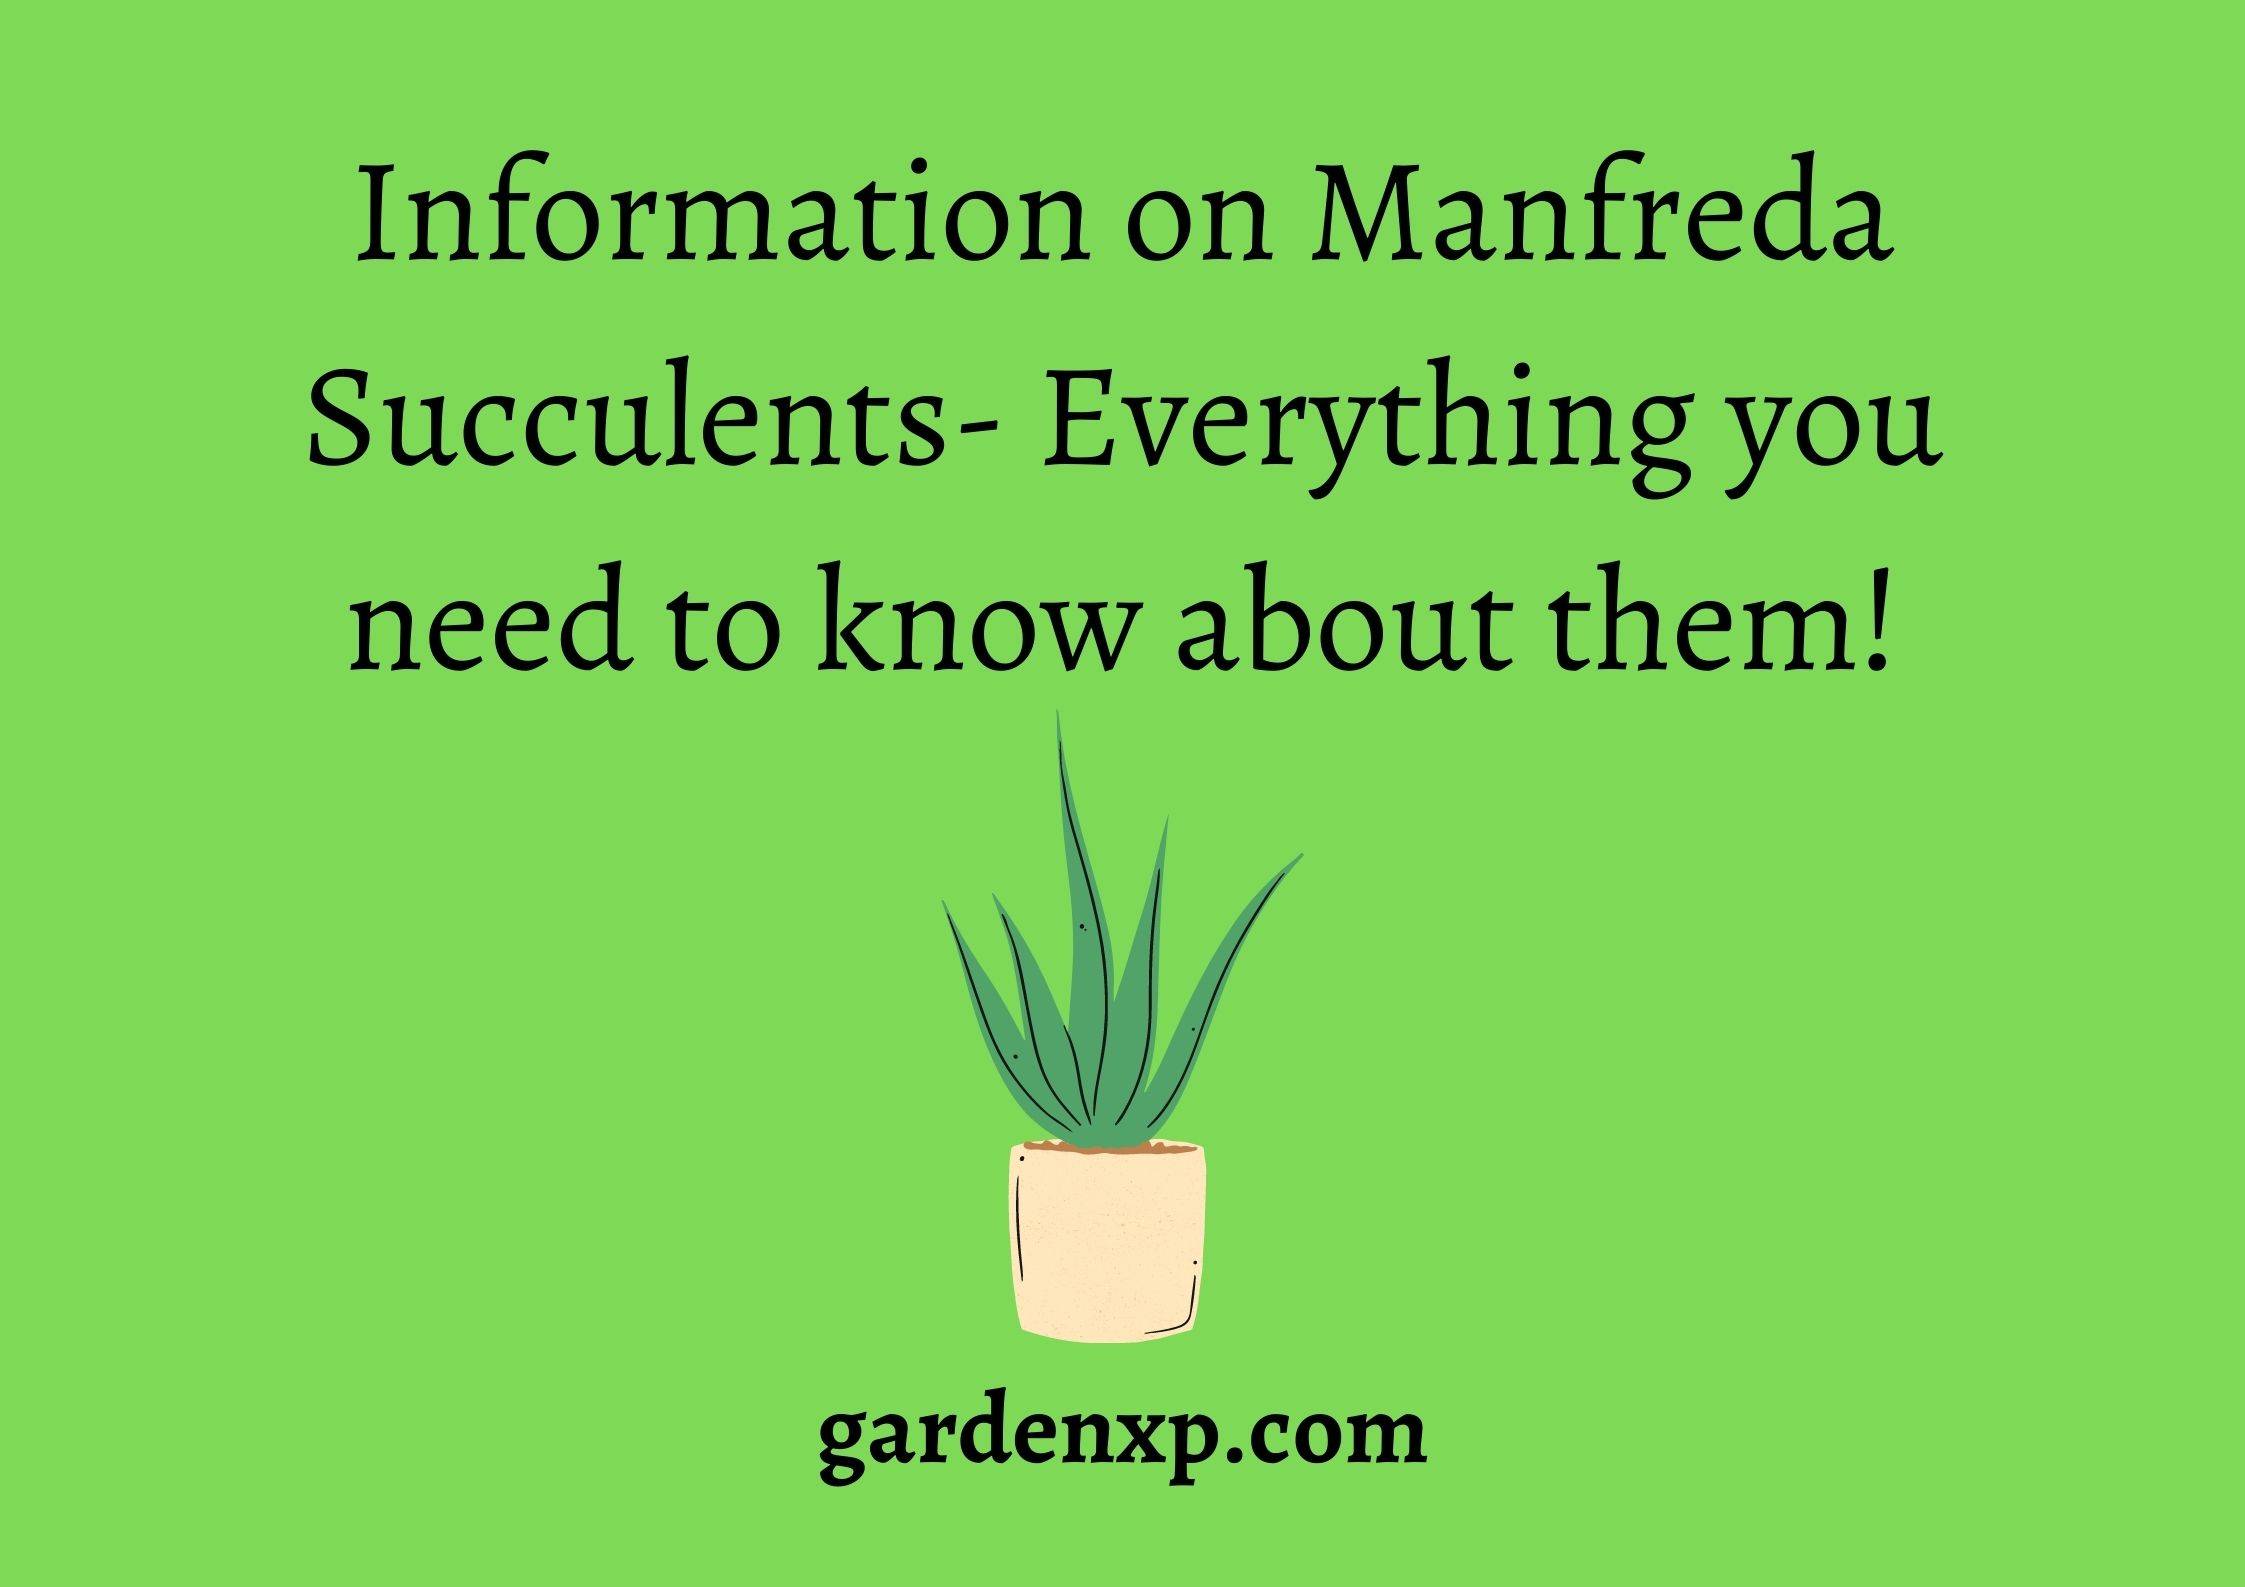 What are Manfreda Succulents? - Types of Manfreda Plants - Growth and Care Tips